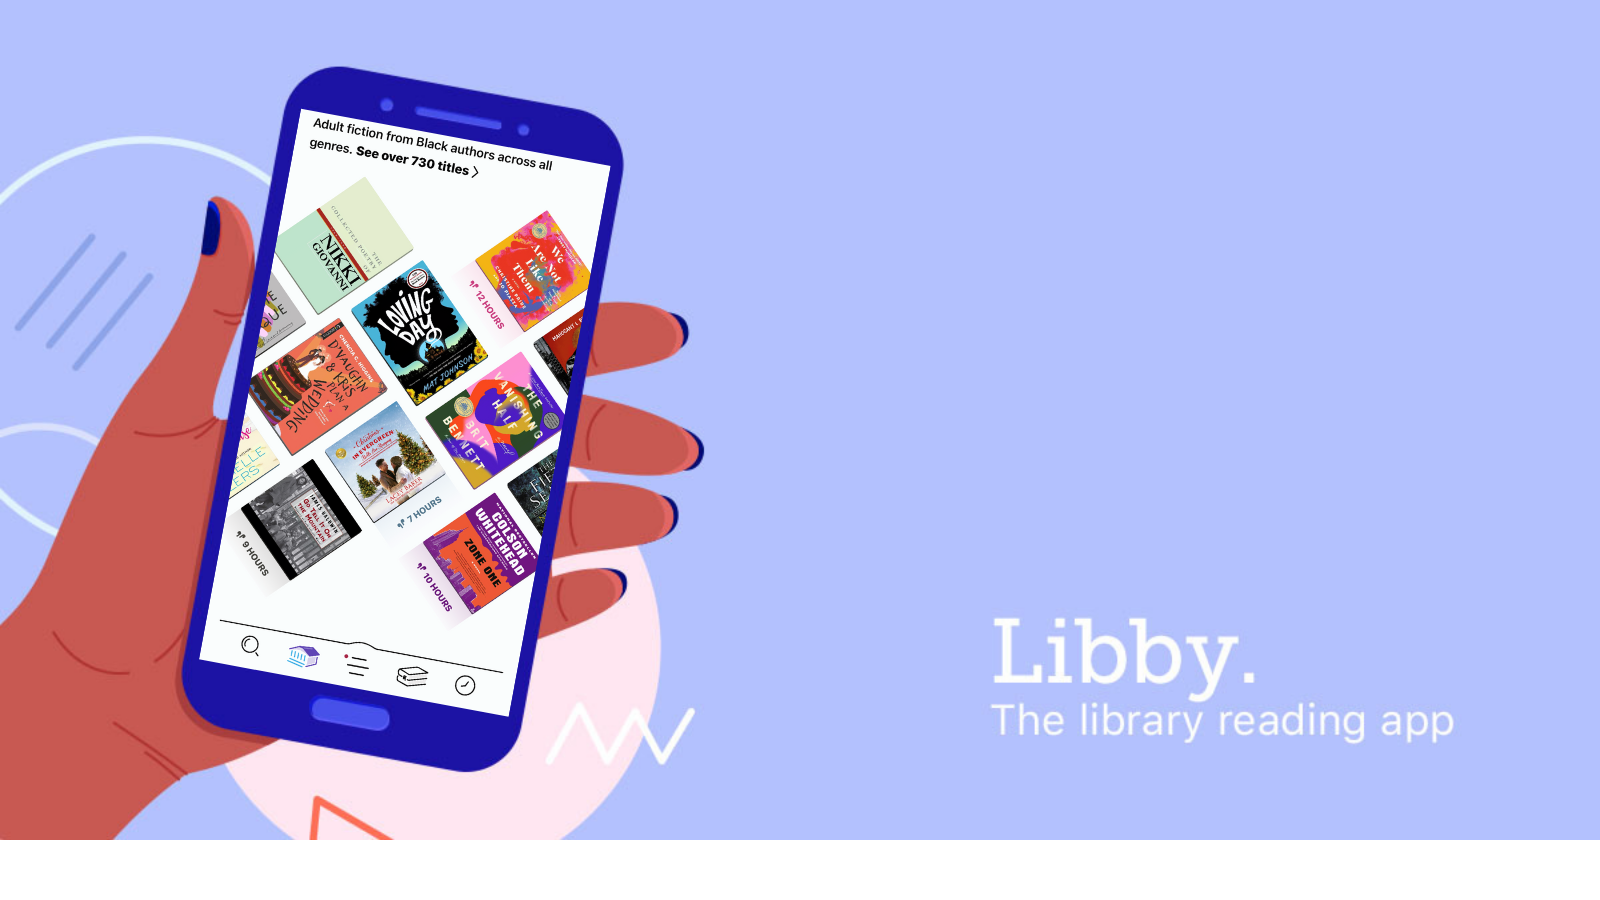 A beginner’s guide to navigating the Libby app